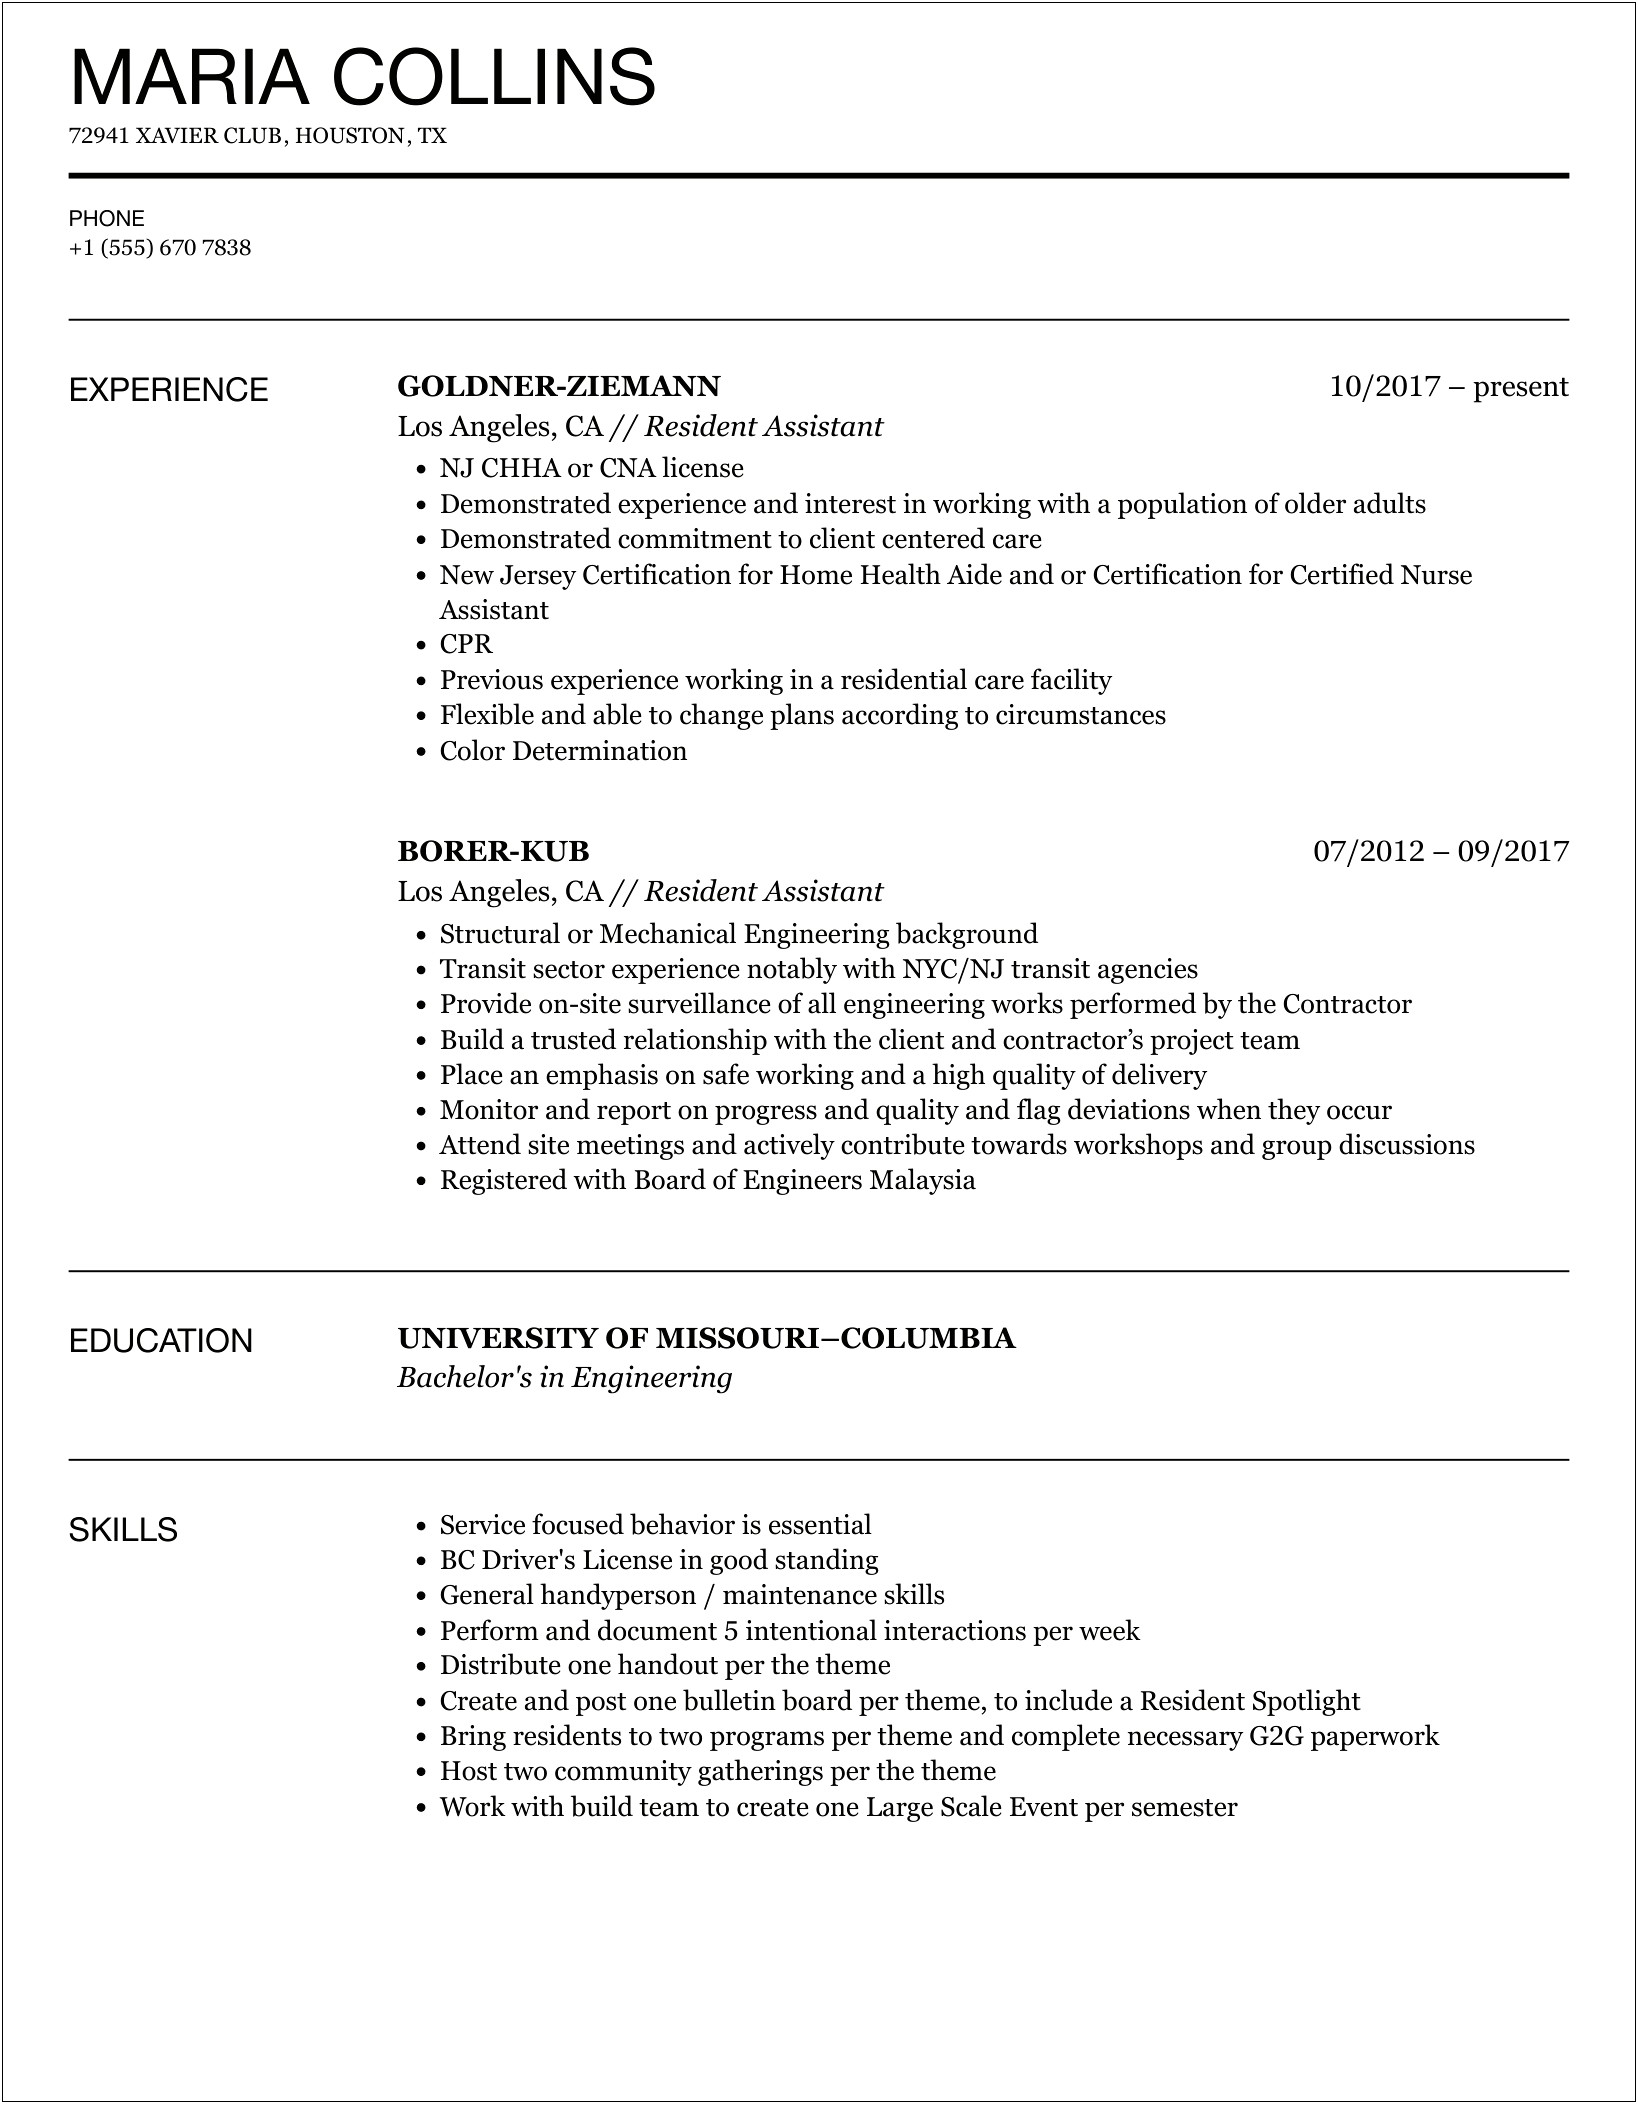 Resume Skills To Write For A Resident Assistant